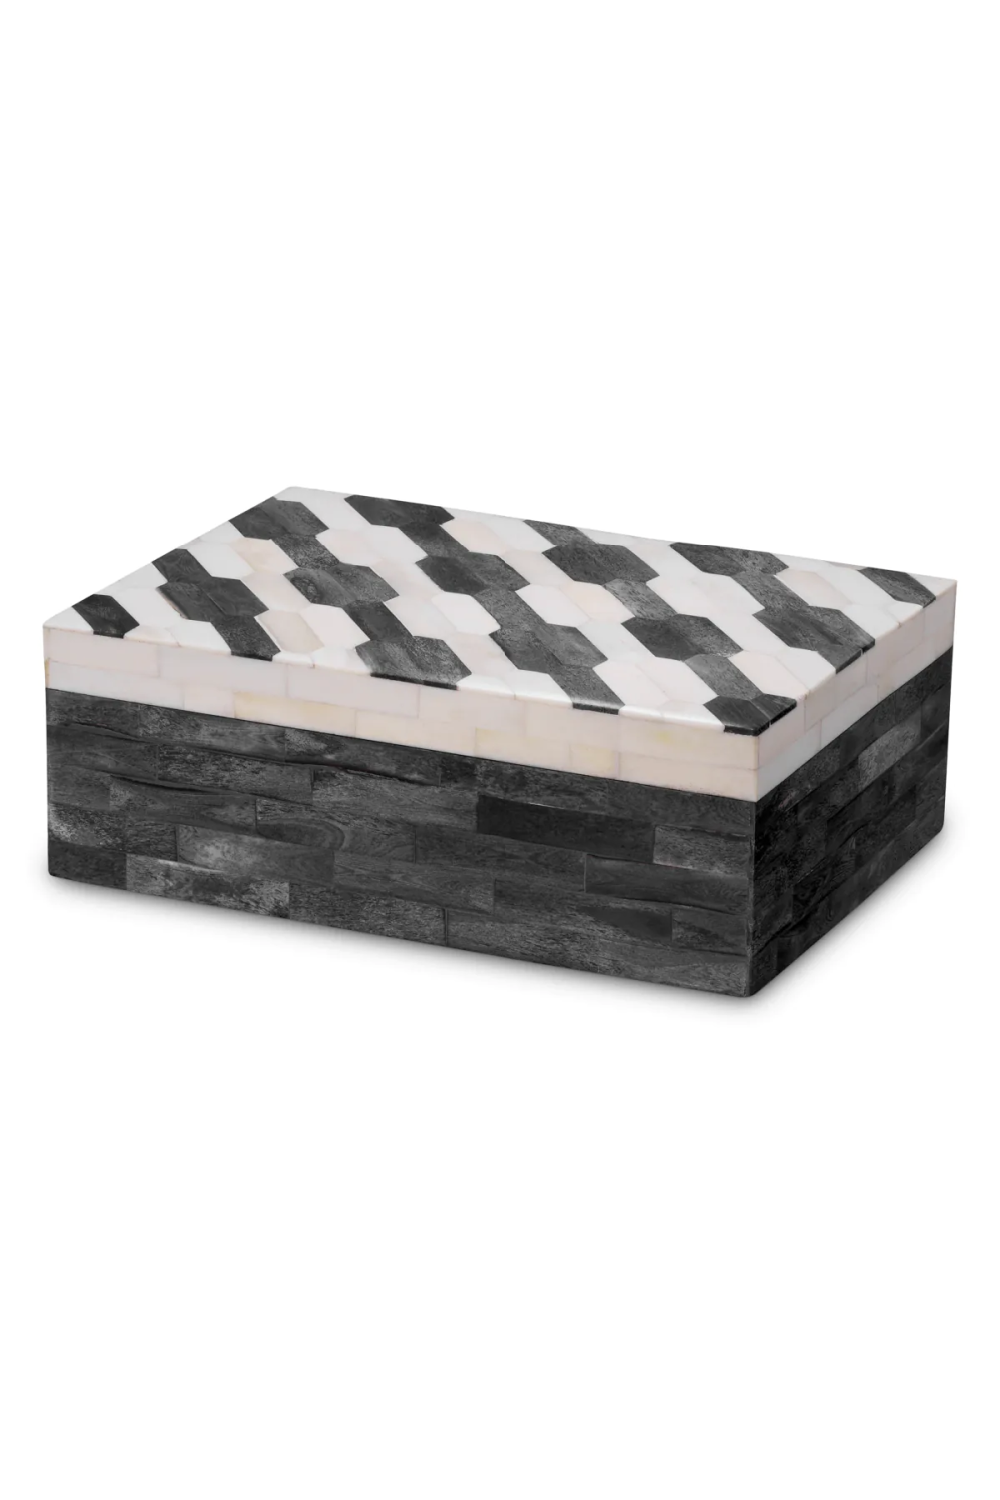 Gray Patterned Box | Eichholtz Rodeo | Oroa.com